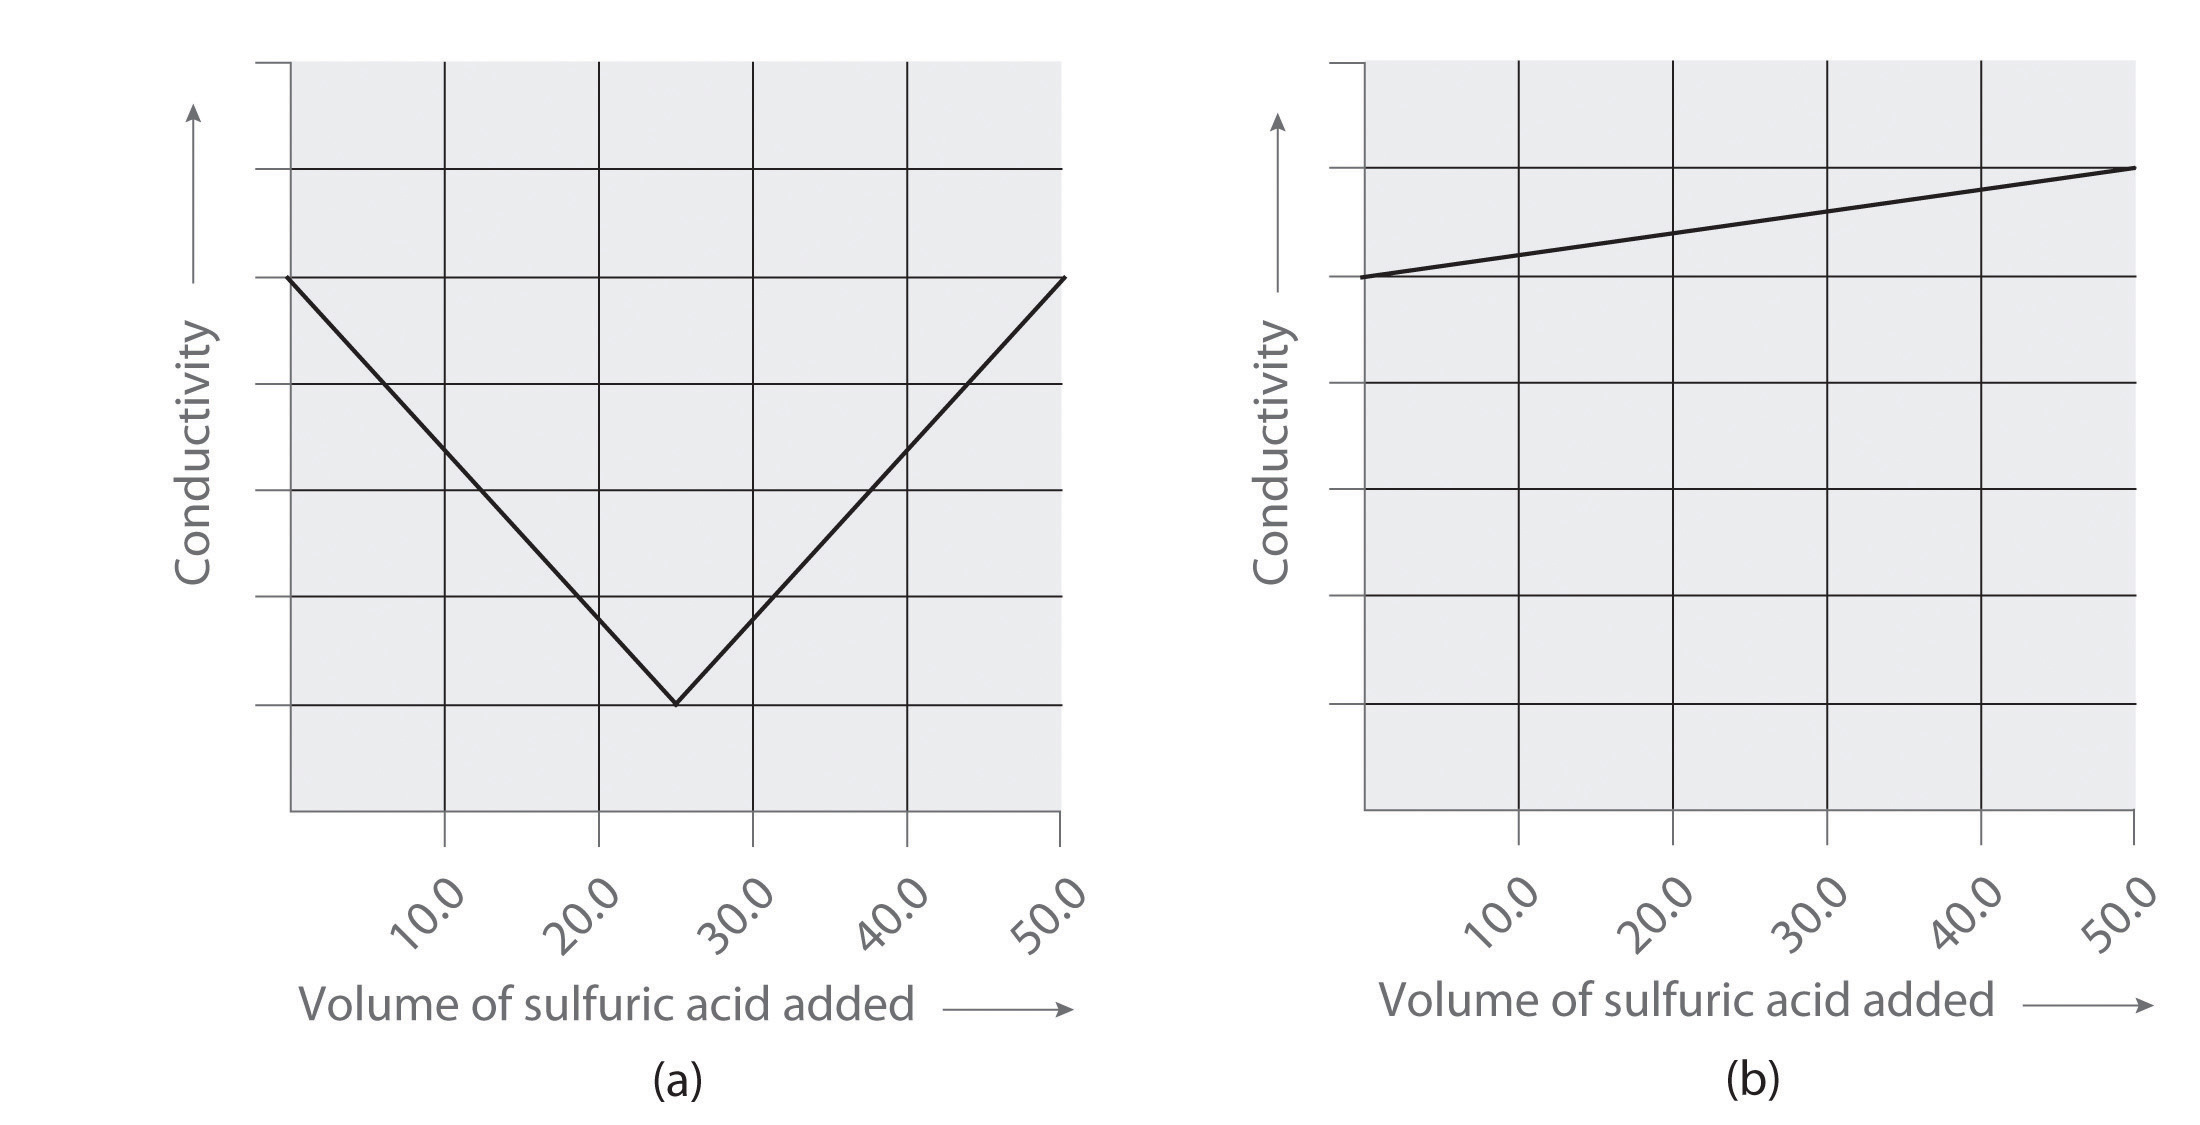 Two graphs of conductivity versus Volume of sulfuric acid added. Conductivity drops linearly in graph A until 25 mL are added at which point conductivity linearly increases. Graph B shows continuous growth in conductivity as more sulfuric acid is added.